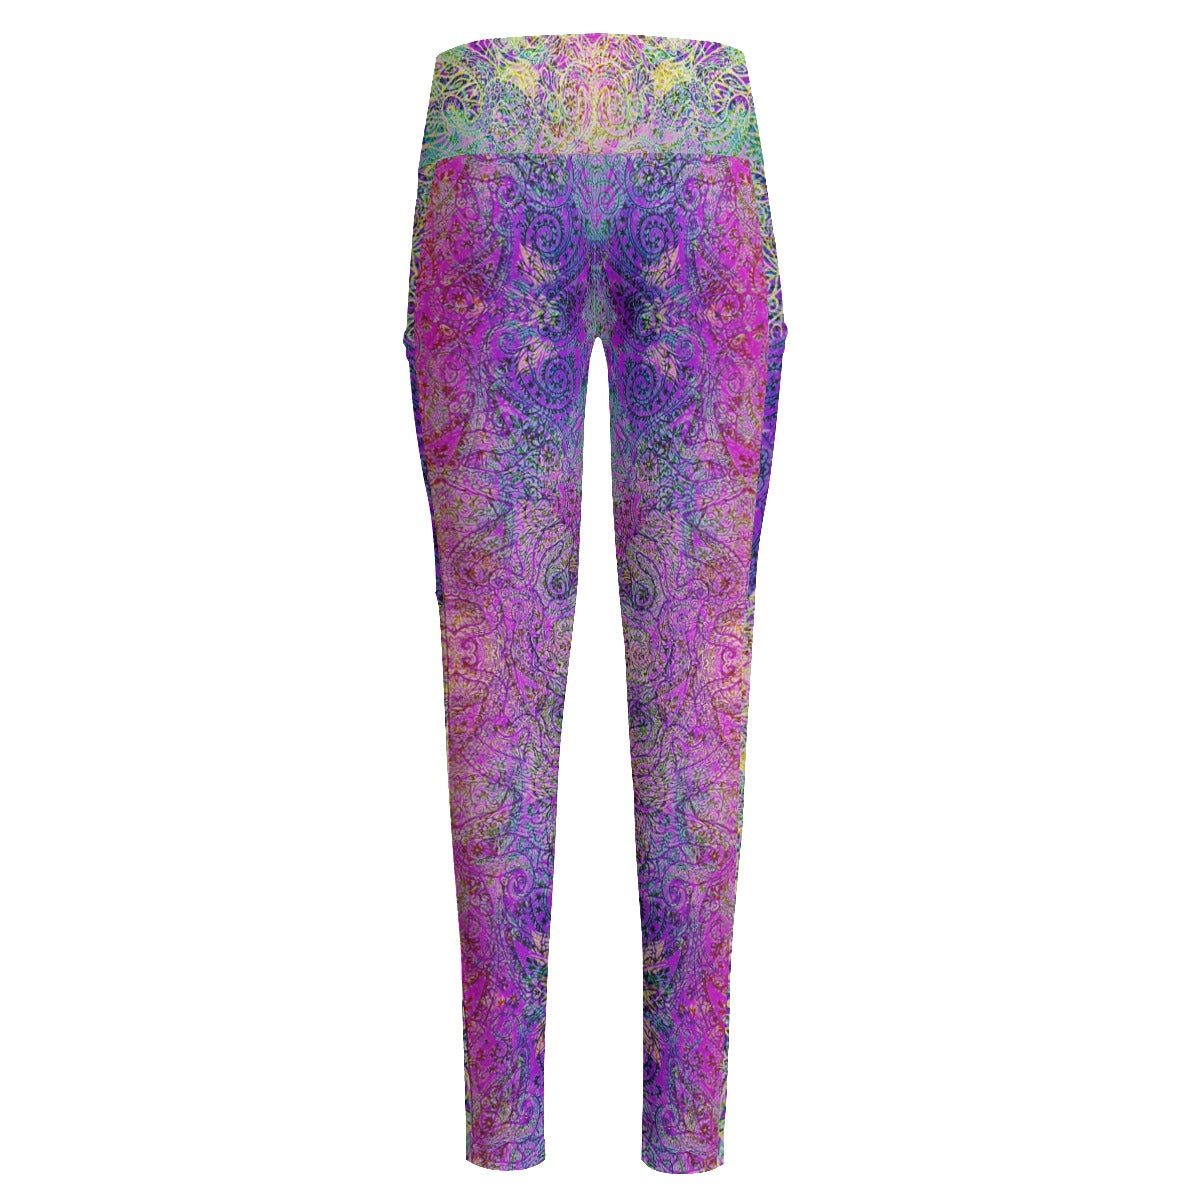 Octopus Paisley High Waist Leggings With Side Pockets